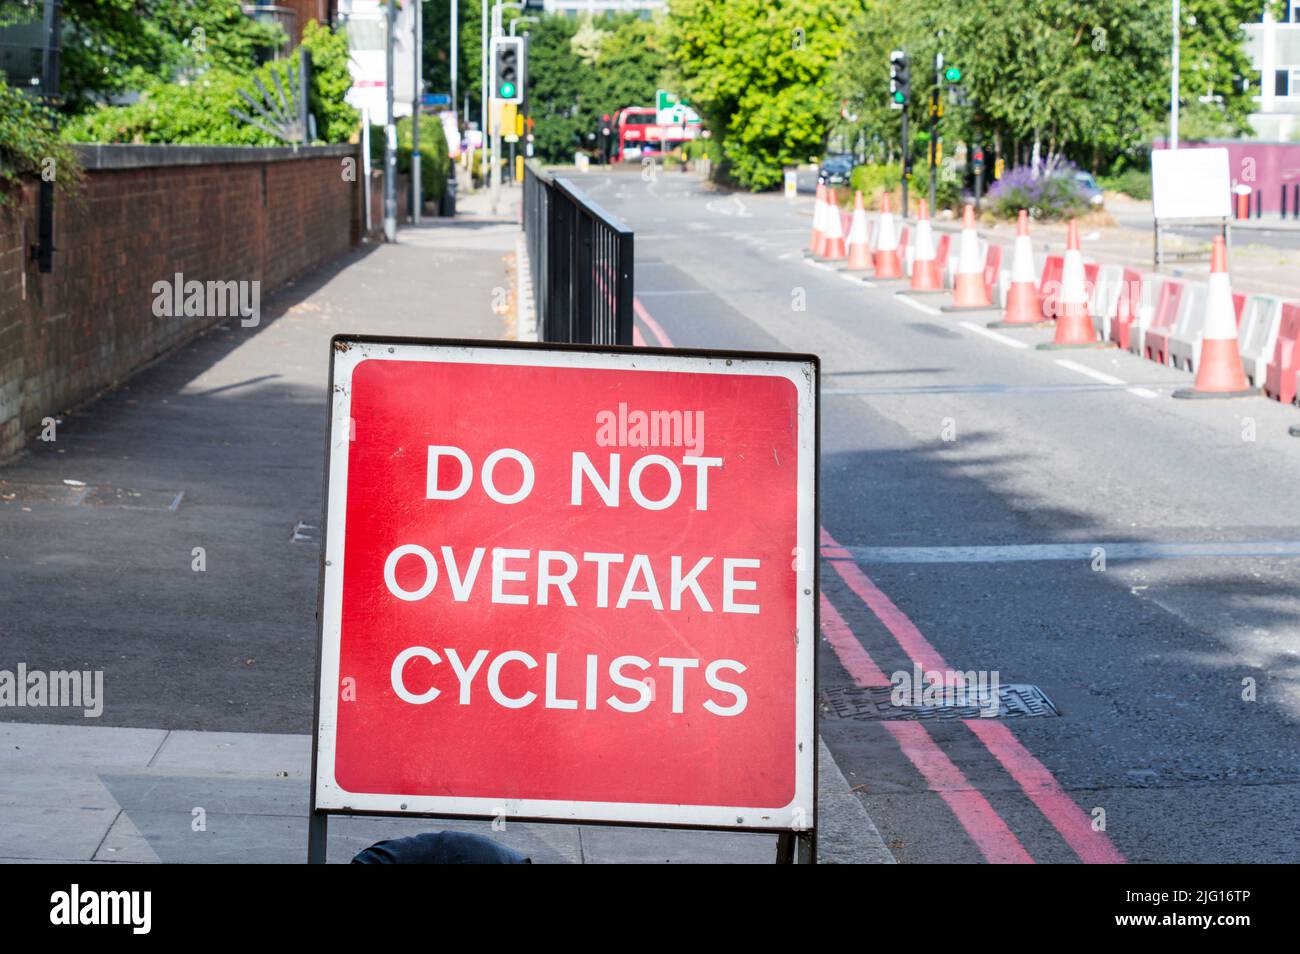 Do Not Overtake Cyclists road sign in a single lane road Stock Photo